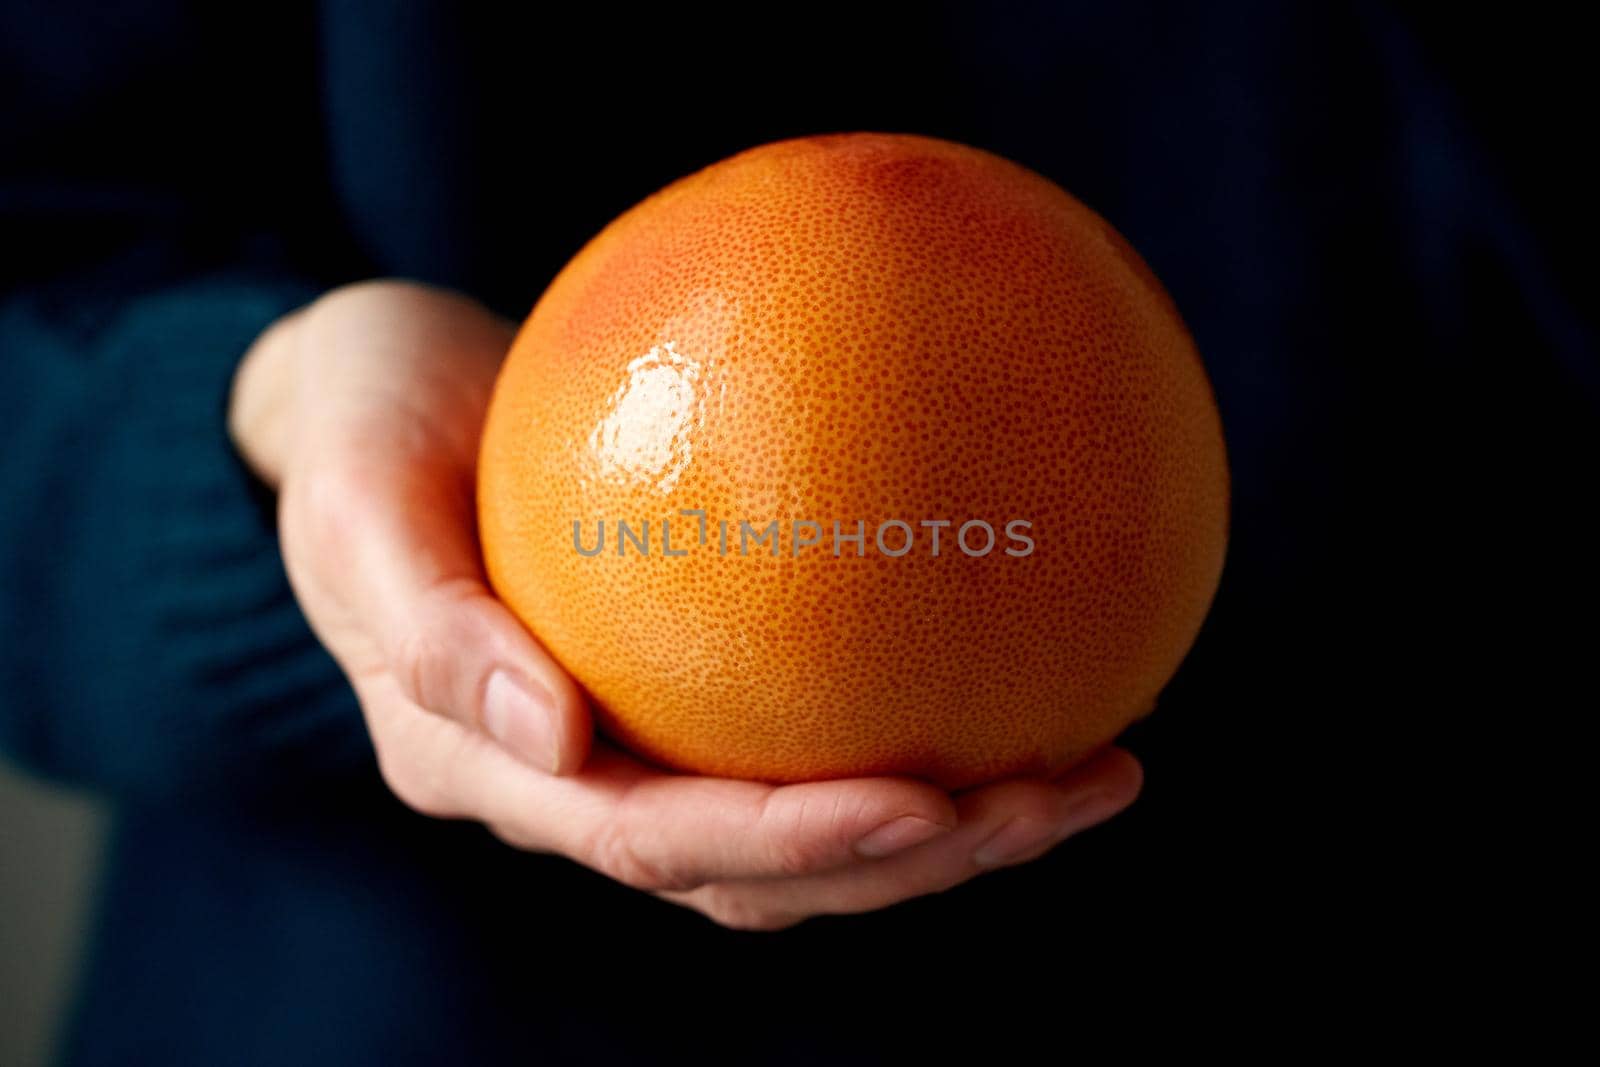 Close-up of woman's hand holding whole bright citrus fruit grapefruit on dark background. Lifestyle, natural light from window. Vitamins